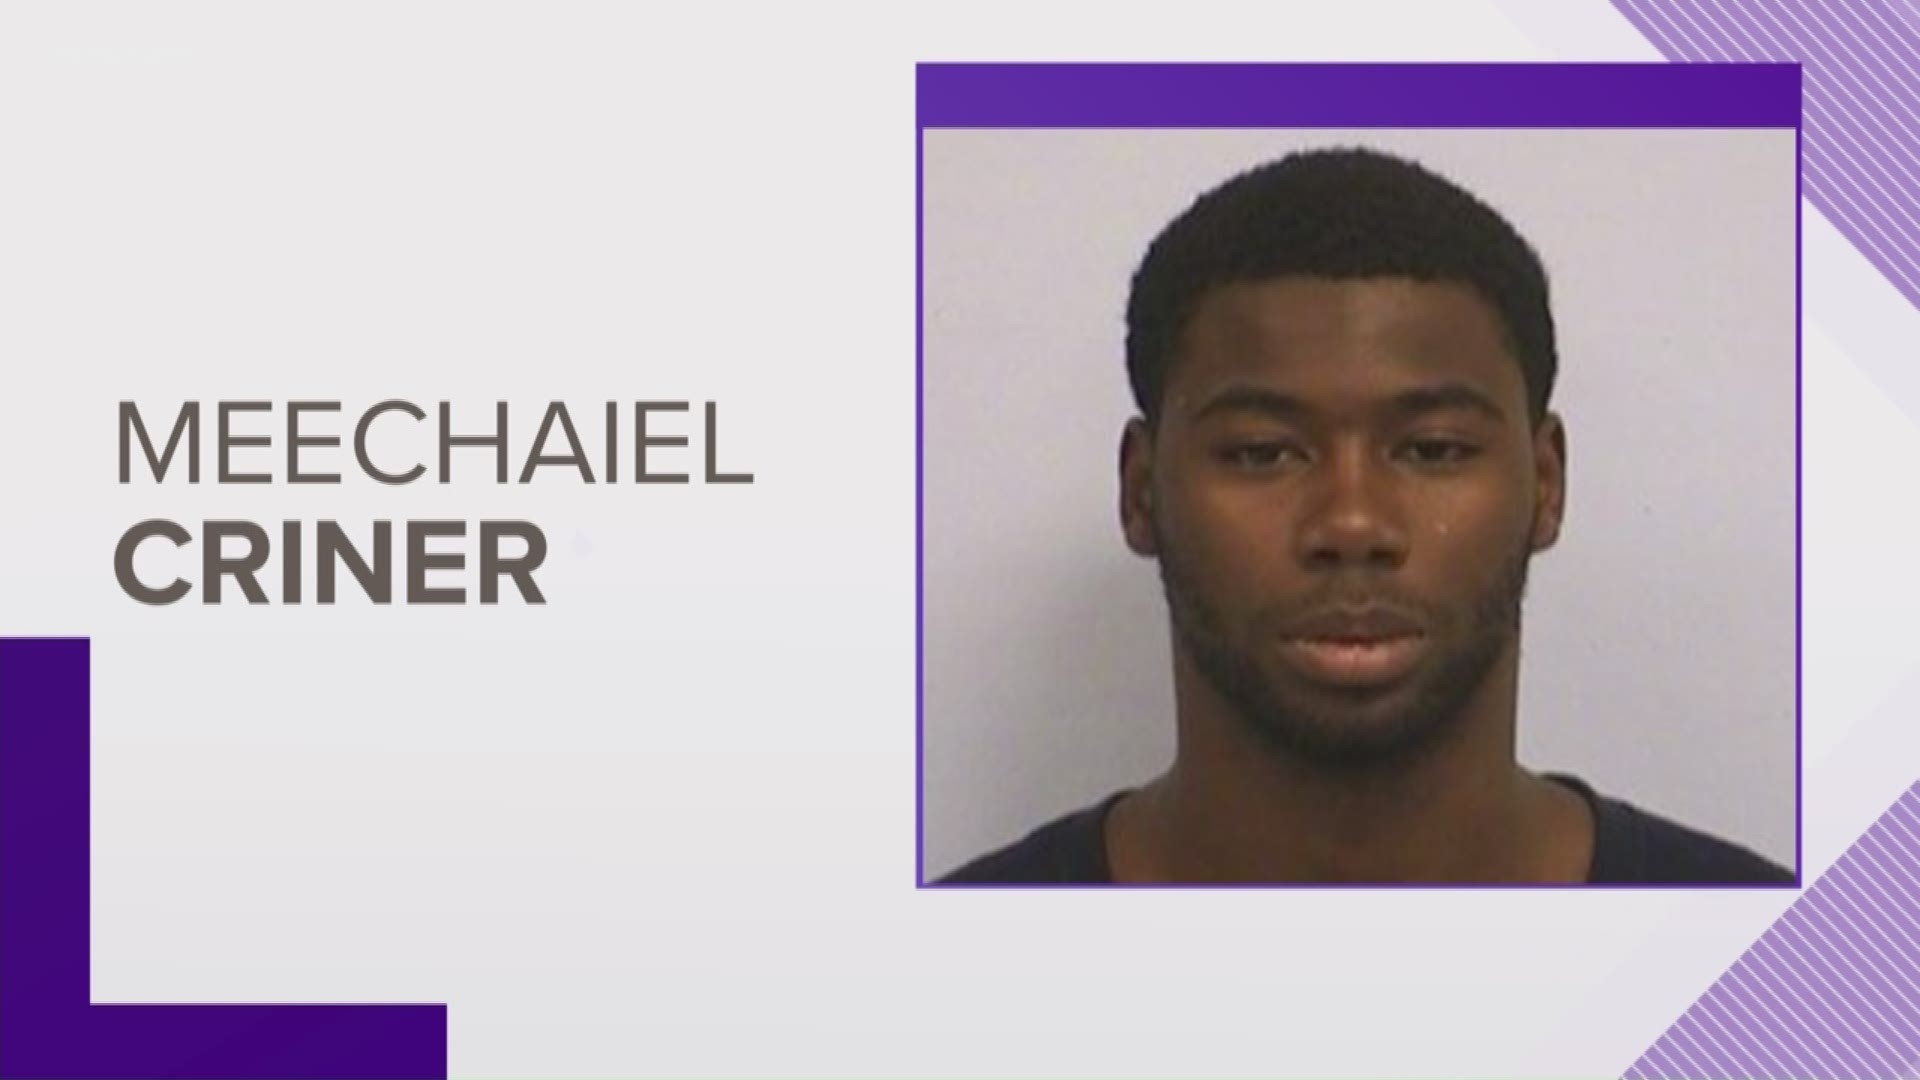 Meechaiel Criner is also accused of sexually assaulting Haruke Weiser in 2016.